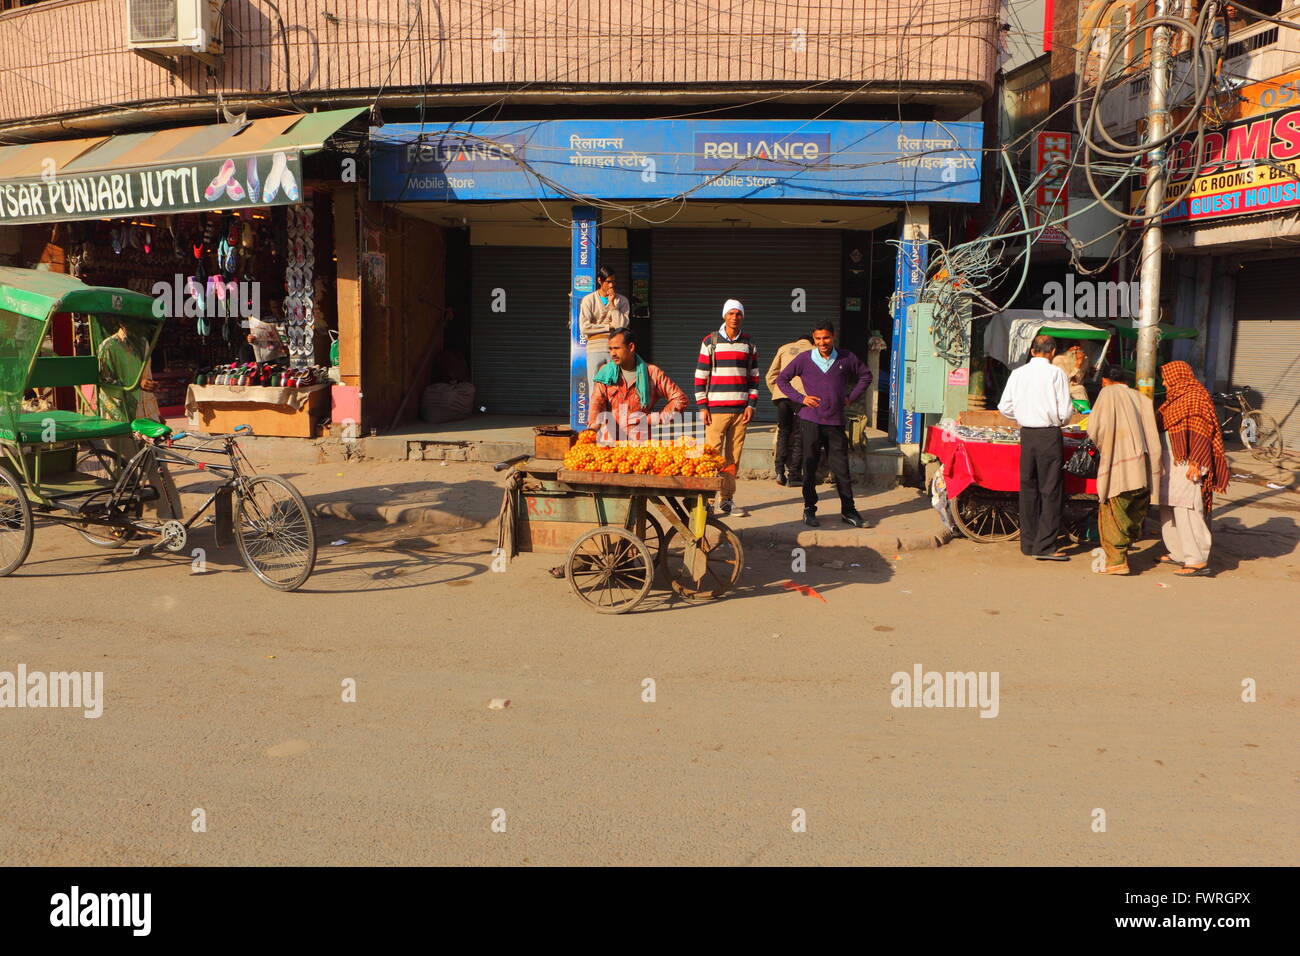 Street scene in the old part of Amritsar city in Punjab, India with people visiting shops and street vendors. Stock Photo